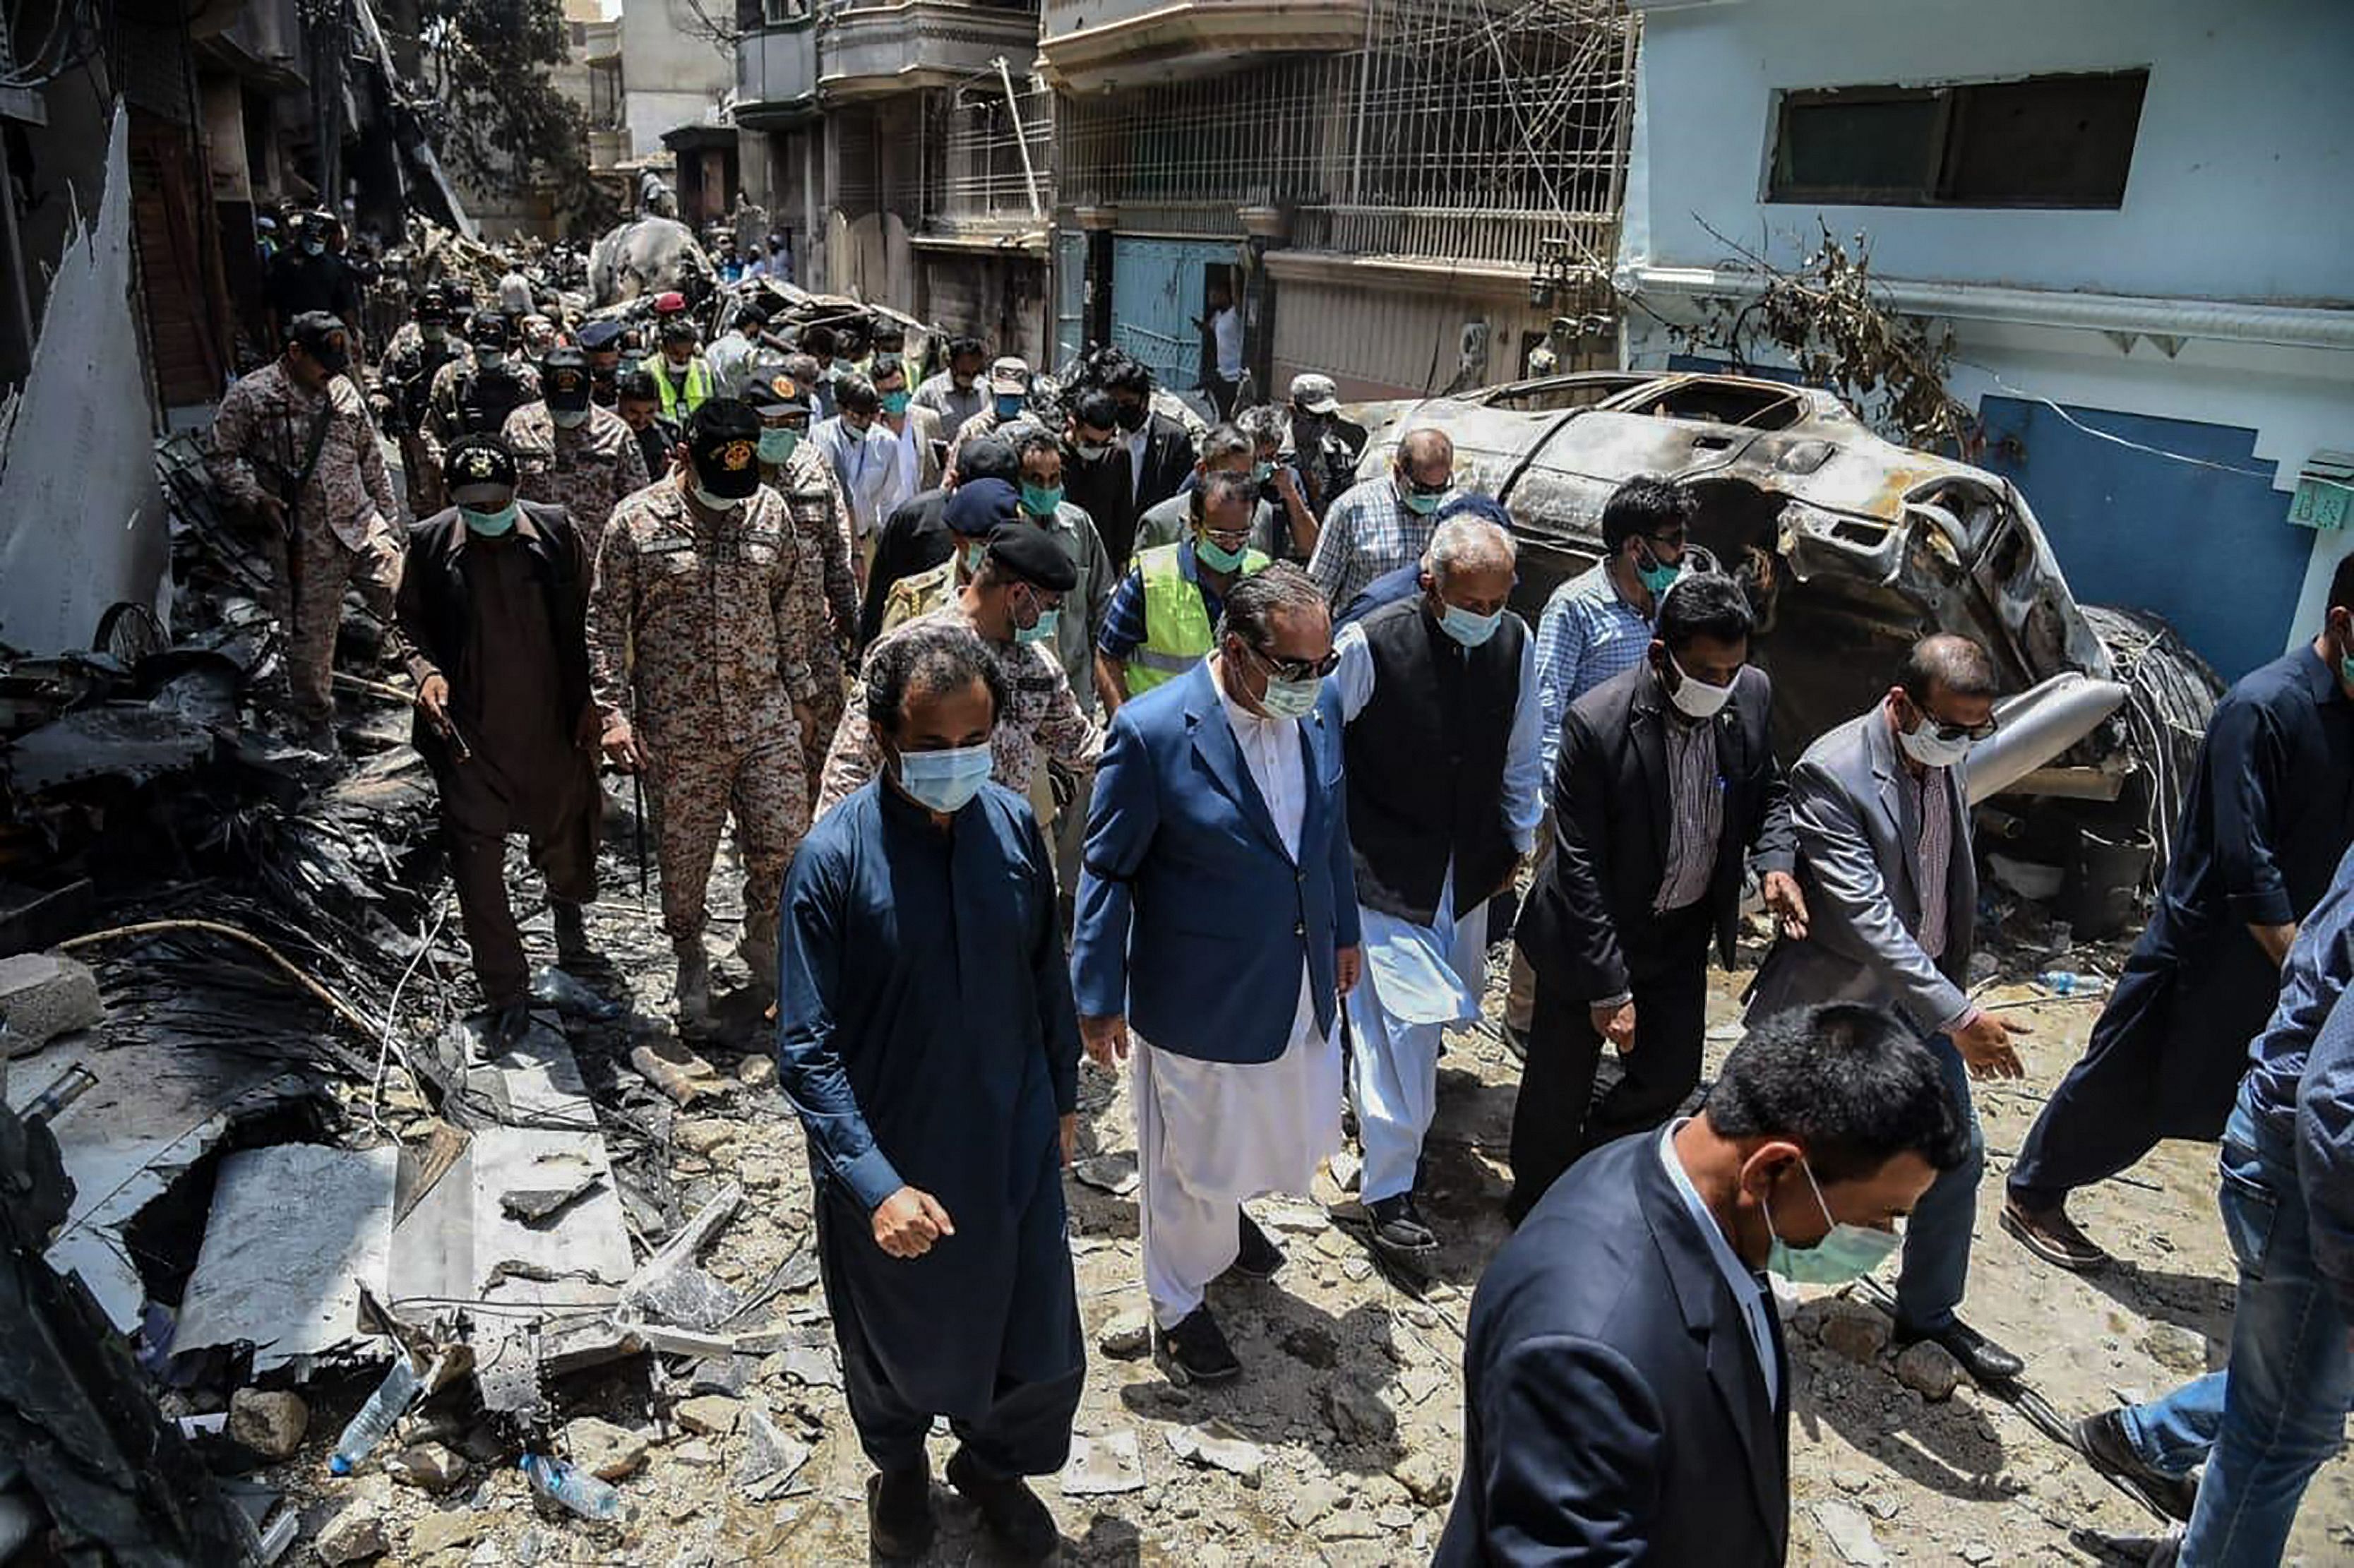 A PIA Airbus jet with 99 people aboard crashed into a crowded residential district of the city of Karachi on Friday afternoon after twice trying to land at the airport. (Credit: AFP Photo)